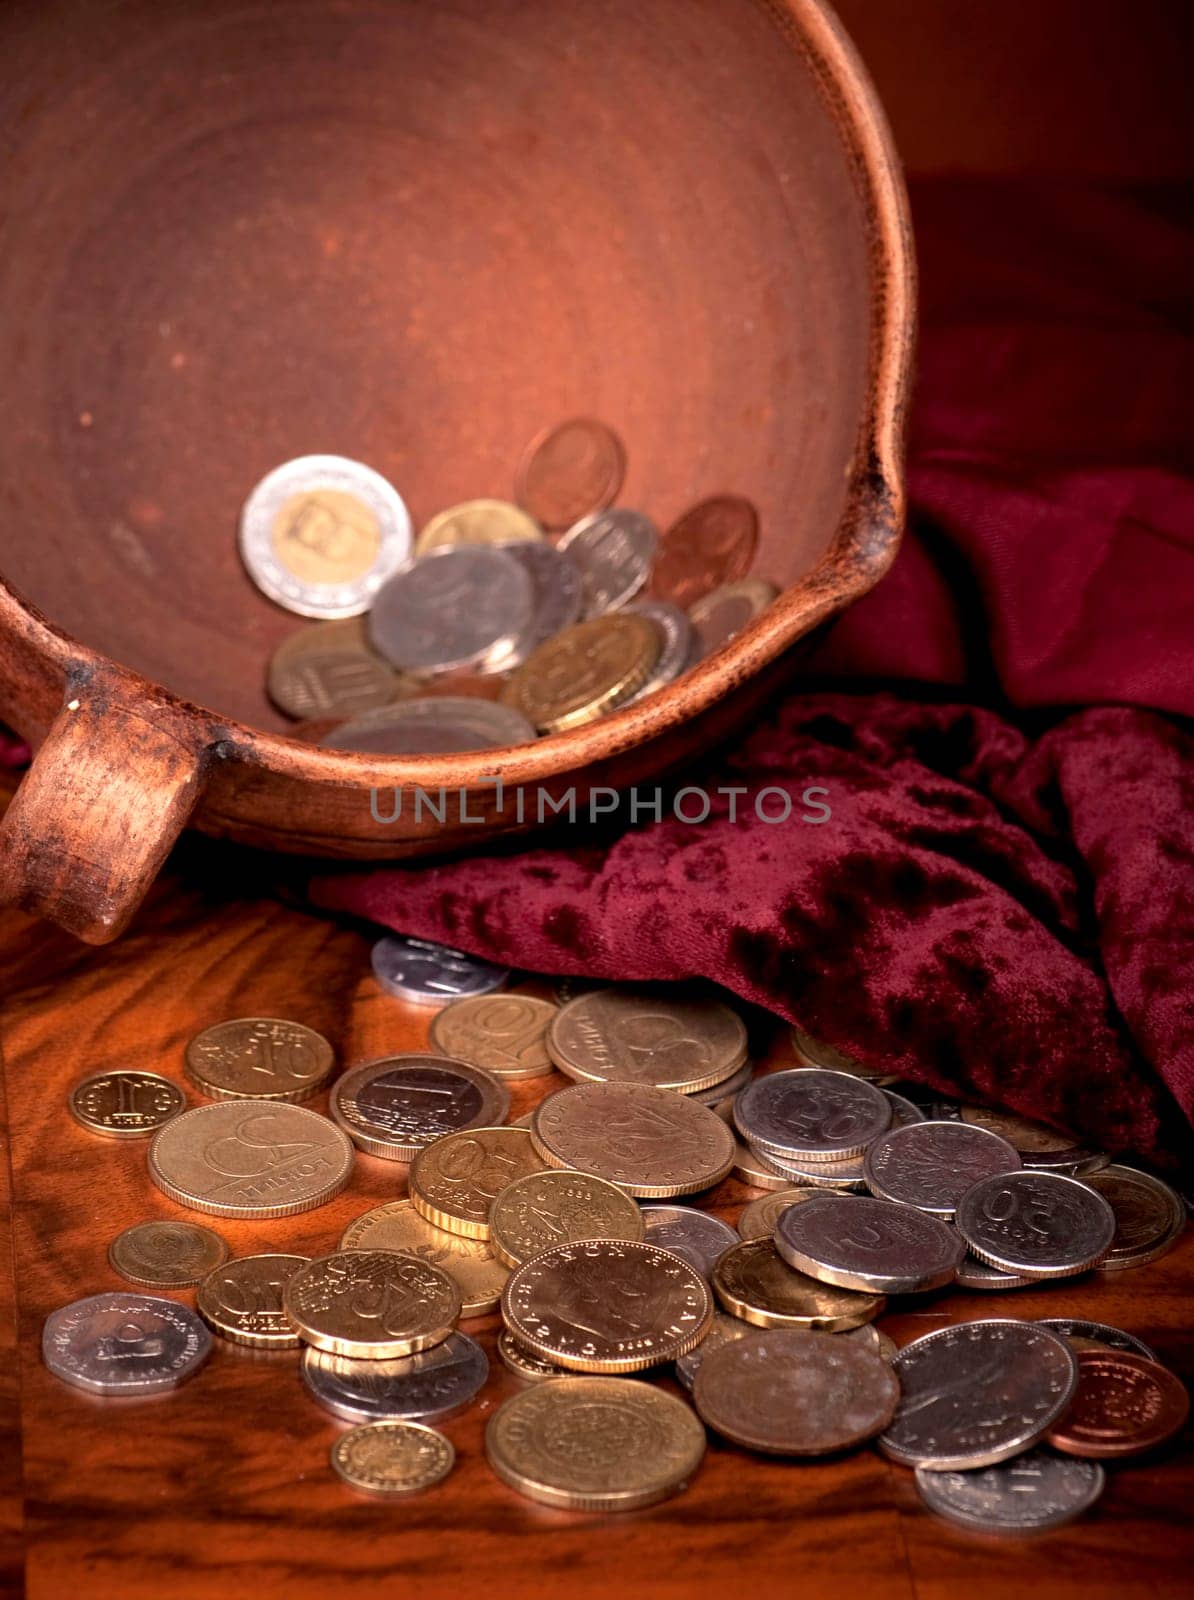 Vintage background with coins, velvet background and pottery. Money of different countries is combined in clay bowl. by aprilphoto